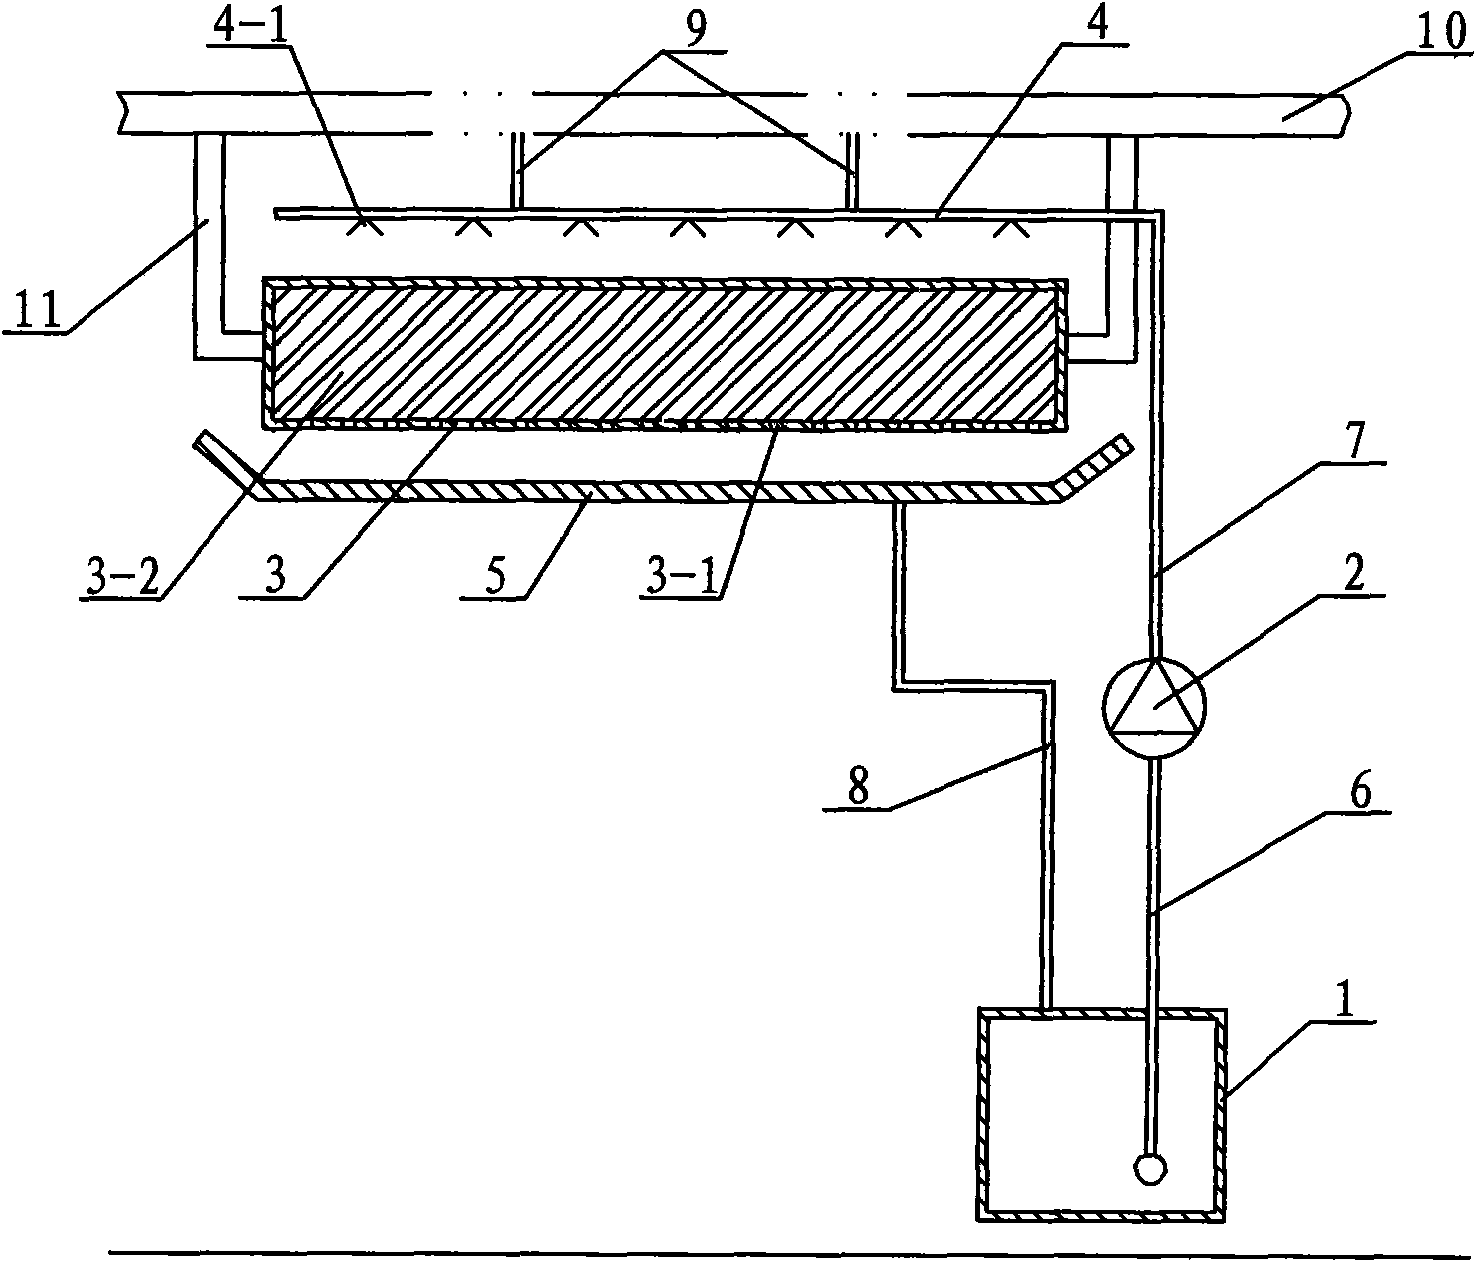 Zero energy consumption temperature reducing humidifier for bus shelter